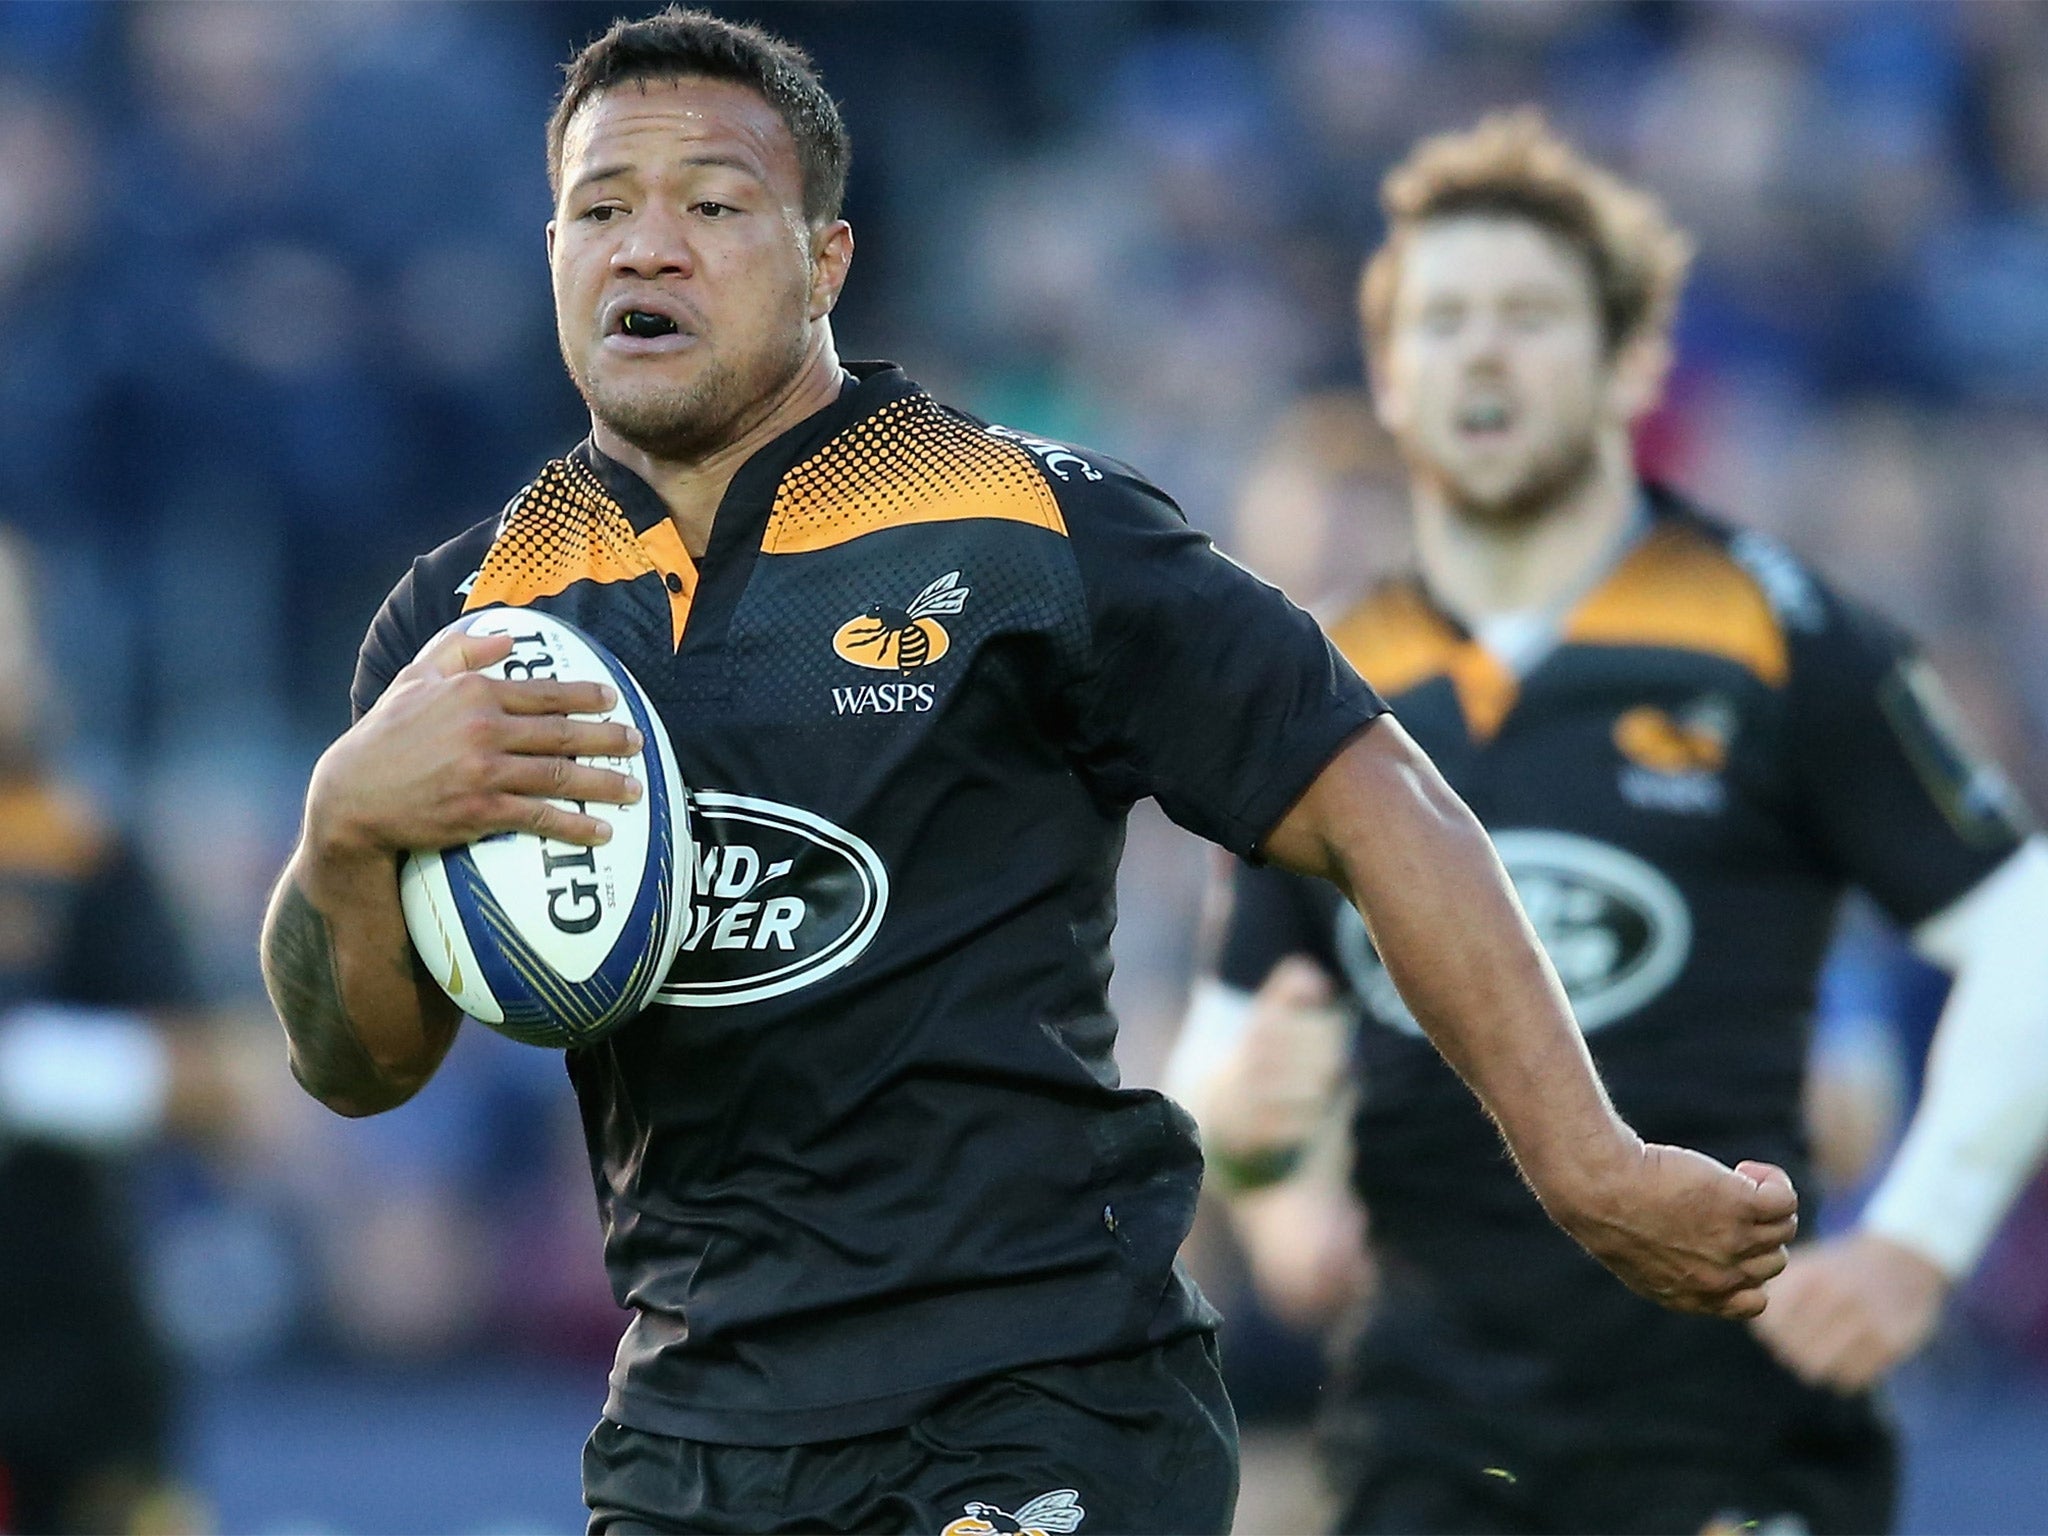 The Wasps centre Alapati Leiua is a member of the Samoan team